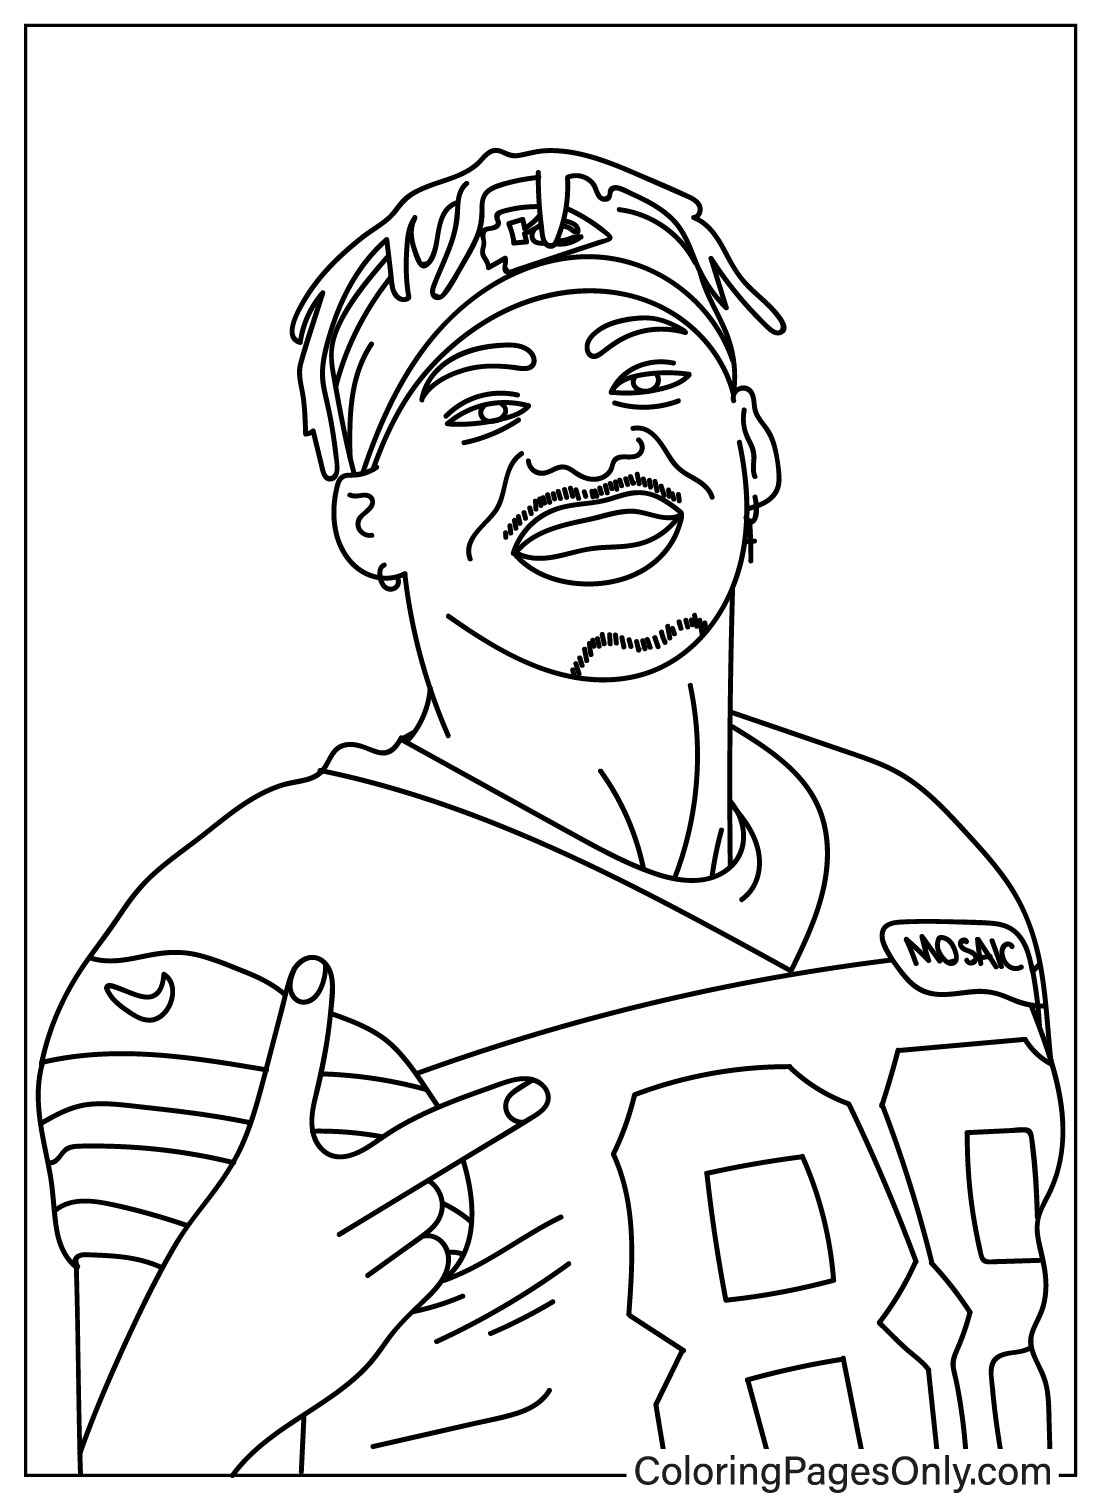 Kansas City Chiefs coloring pages ...